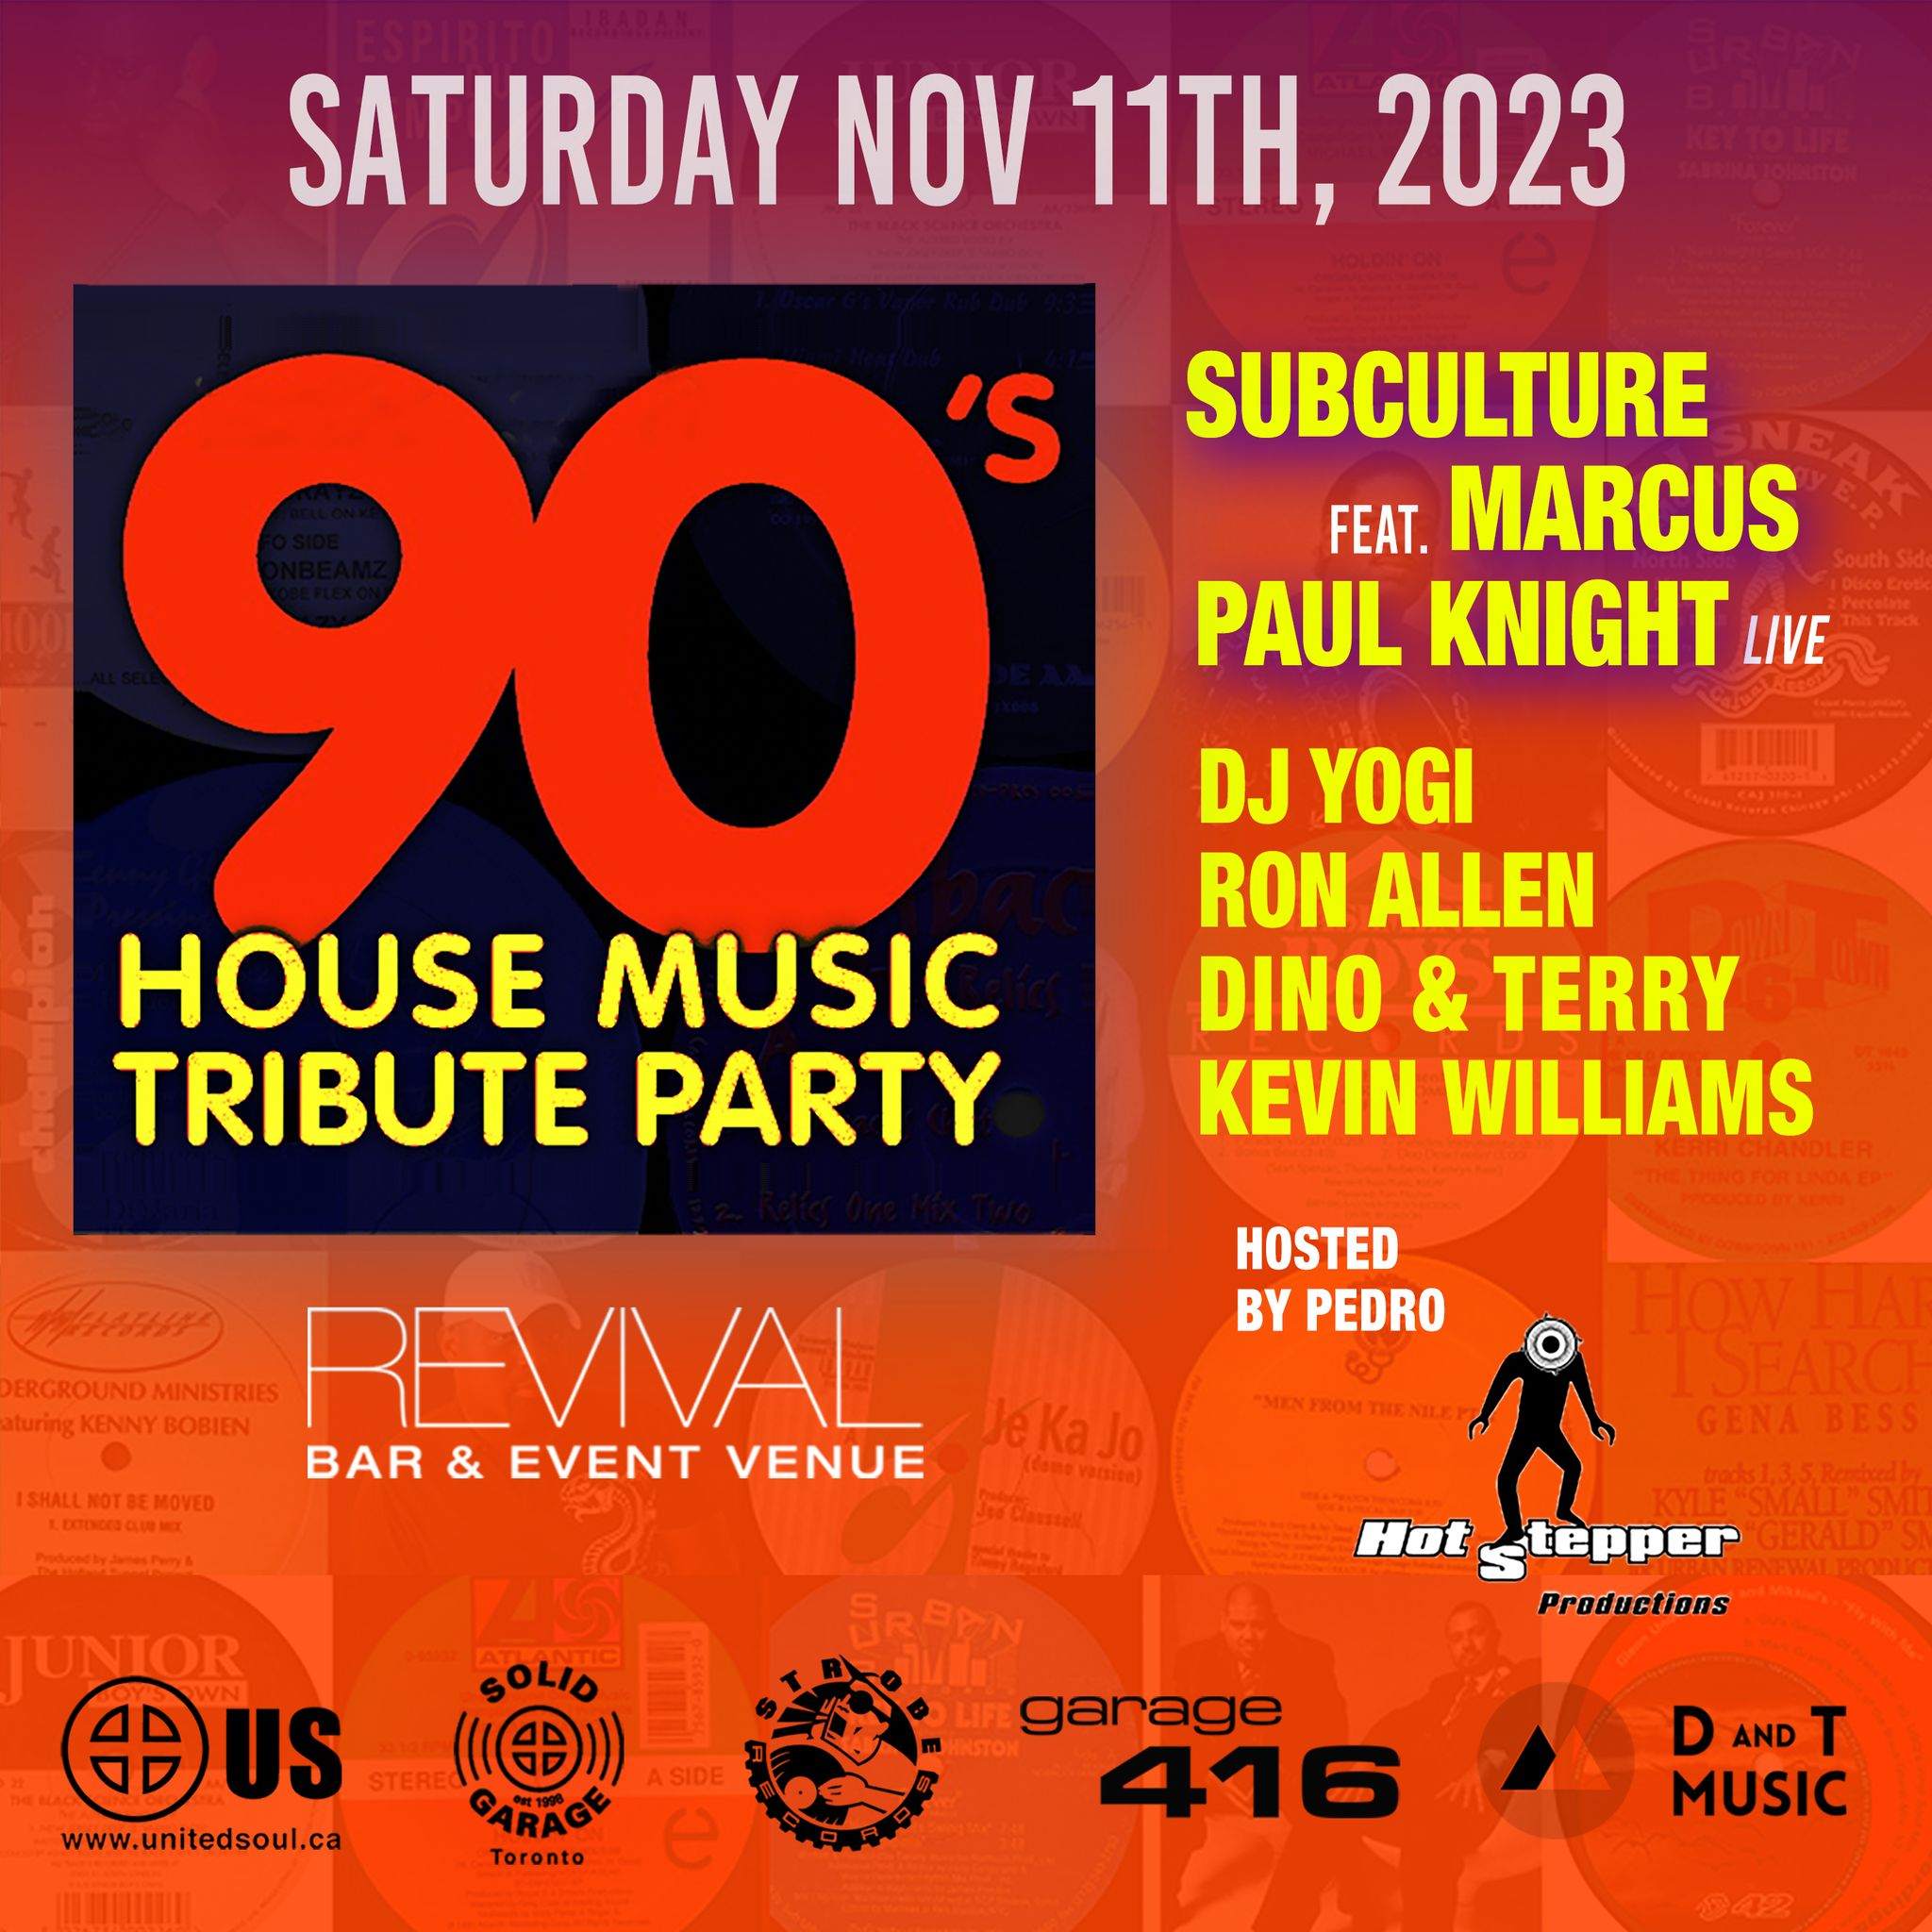 90's House Music Tribute Party - Página trasera